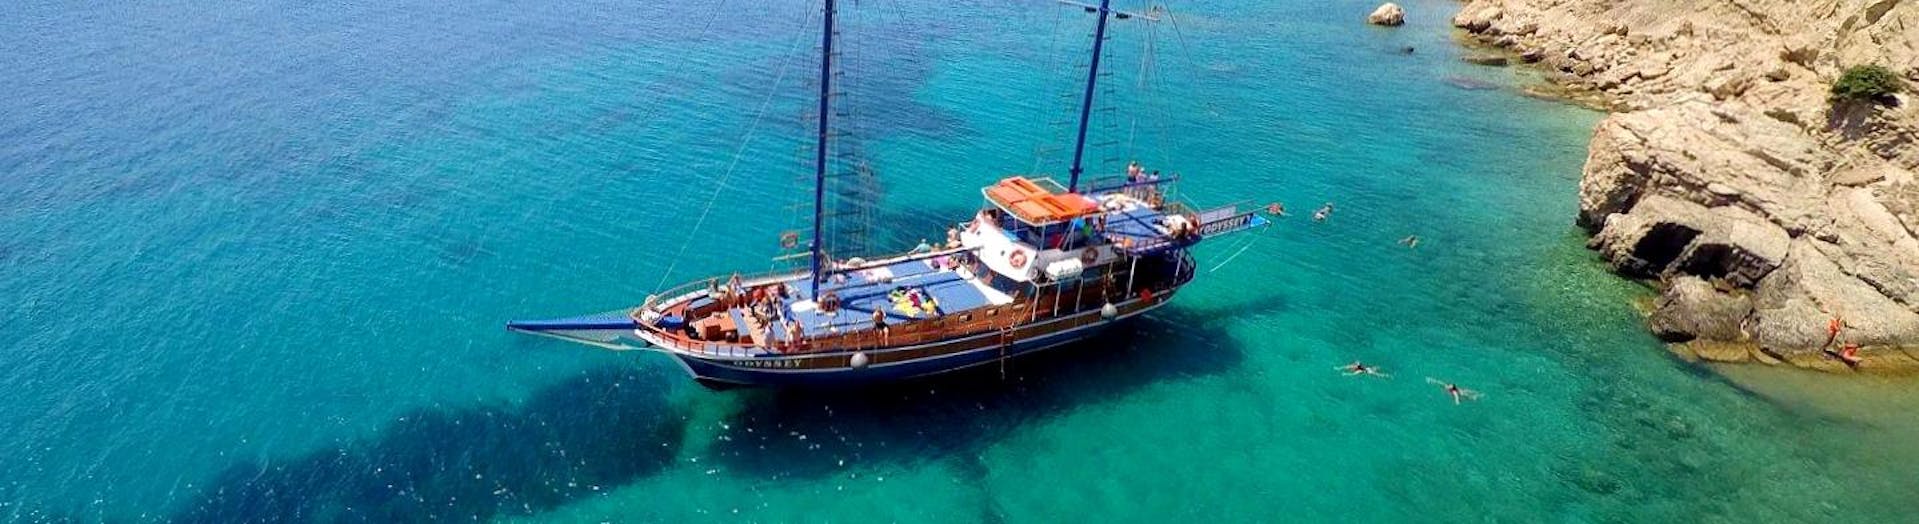 An elegant sailboat with participants enjoying a day out in the Greek waters during a sailing boat trip to the islands Kalymnos, Plati & Pserimos with Odyssey Boat Kos.